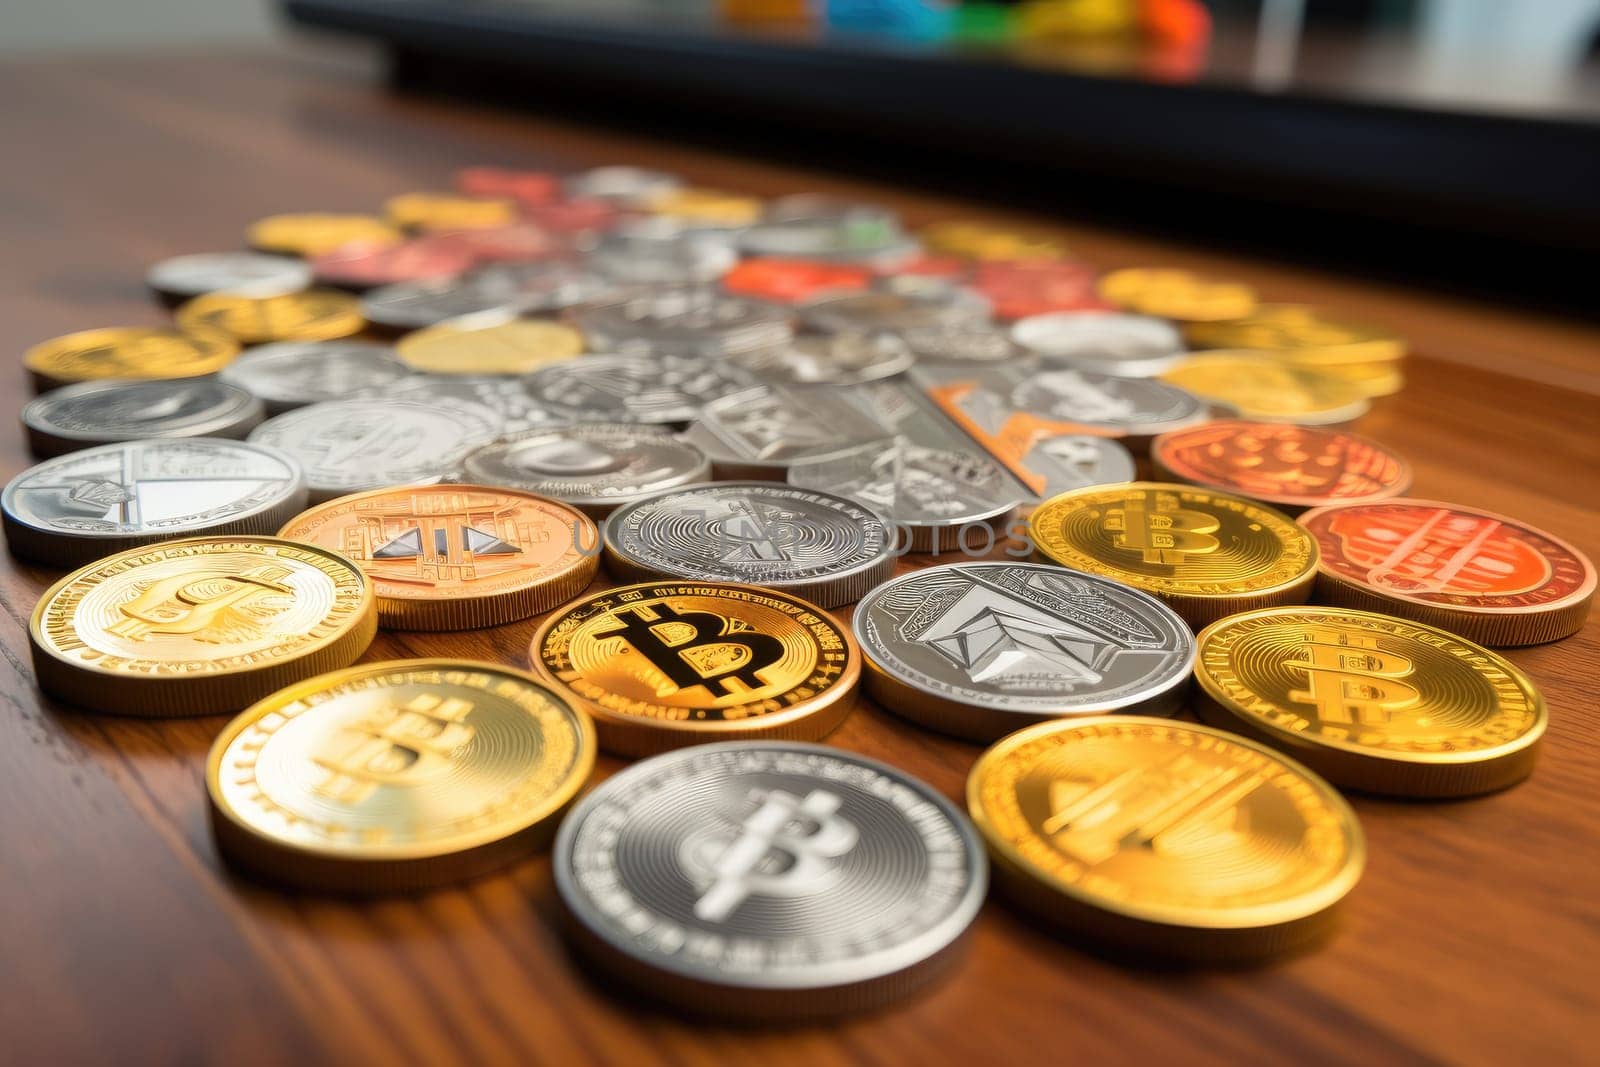 Coins of different cryptocurrencies